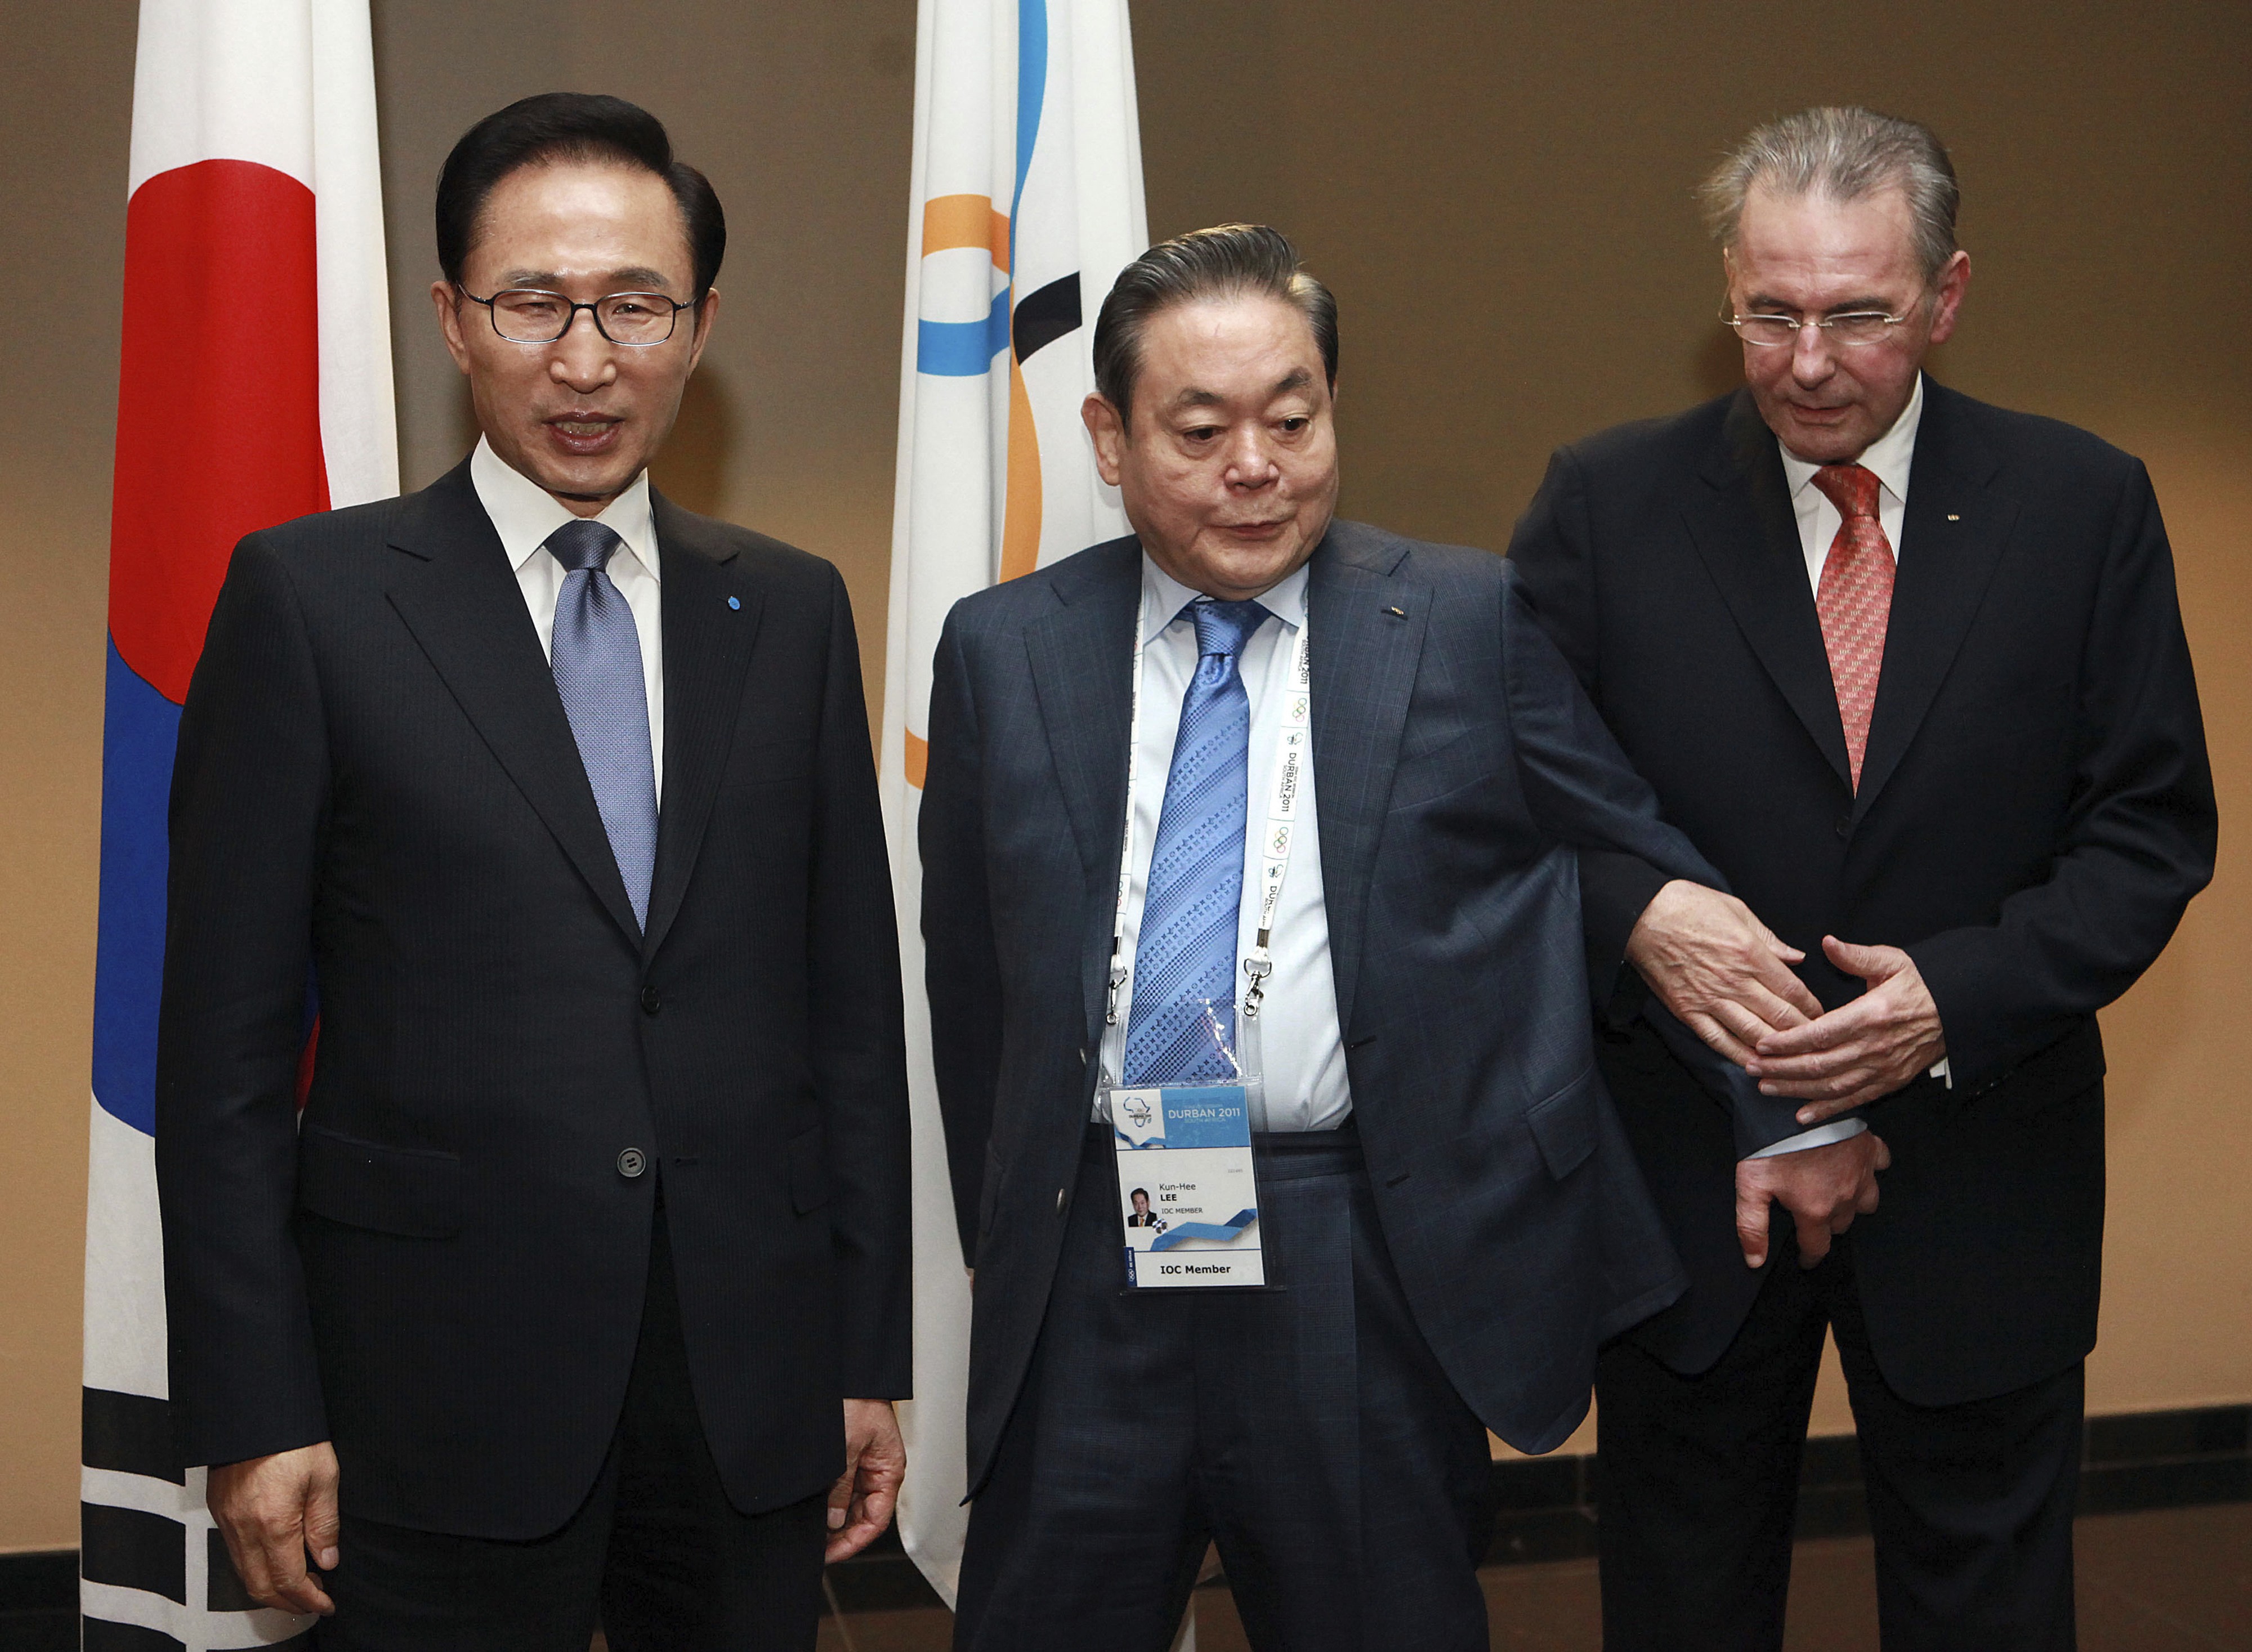 Former International Olympic Committee (IOC) president Jacques Rogge (right) meets with former South Korean President Lee Myung-bak and Samsung Chairman Lee Kun-hee (centre) in 2011 in Durban, South Africa, ahead the opening ceremony for the 123rd IOC session to decide the host city for the 2018 Olympics Winter Games. Samsung has denied a media report it launched illicit lobbying to help bring the 2018 Winter Olympics to Pyeongchang, South Korea. Photo: AP